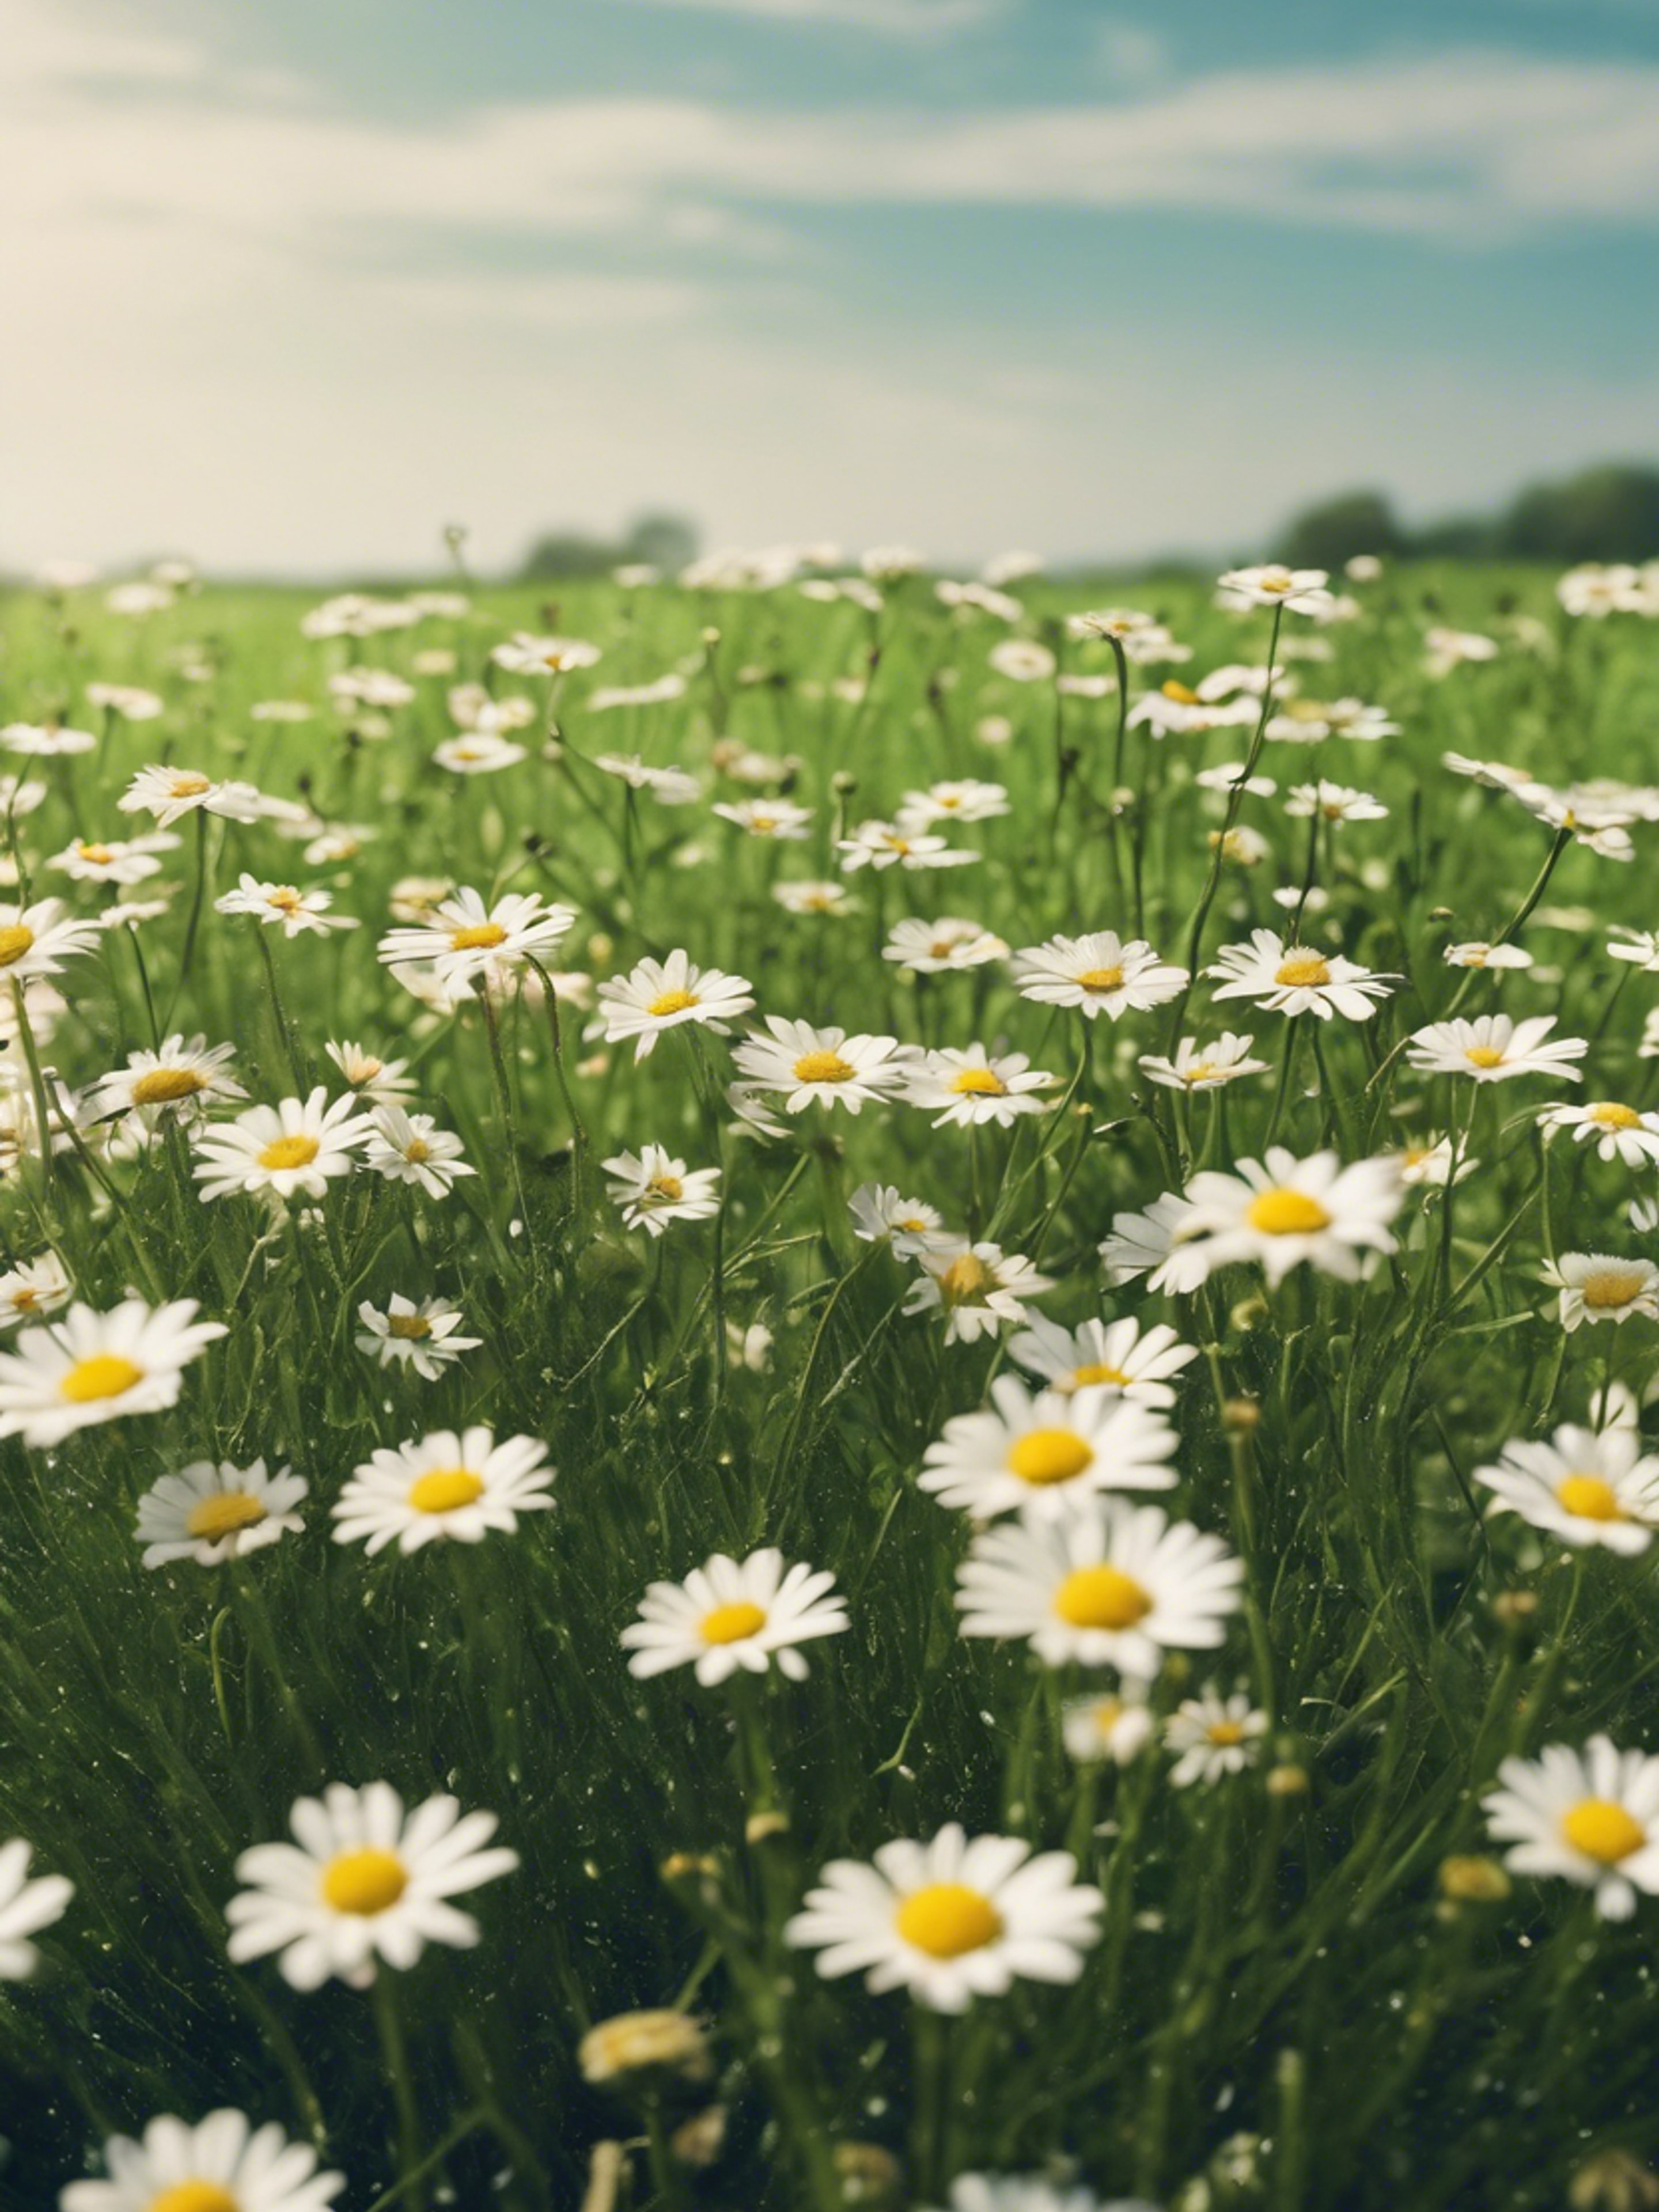 A cool green field sprinkled with daisies under a morning sky. Hintergrund[e270184600e04e908453]